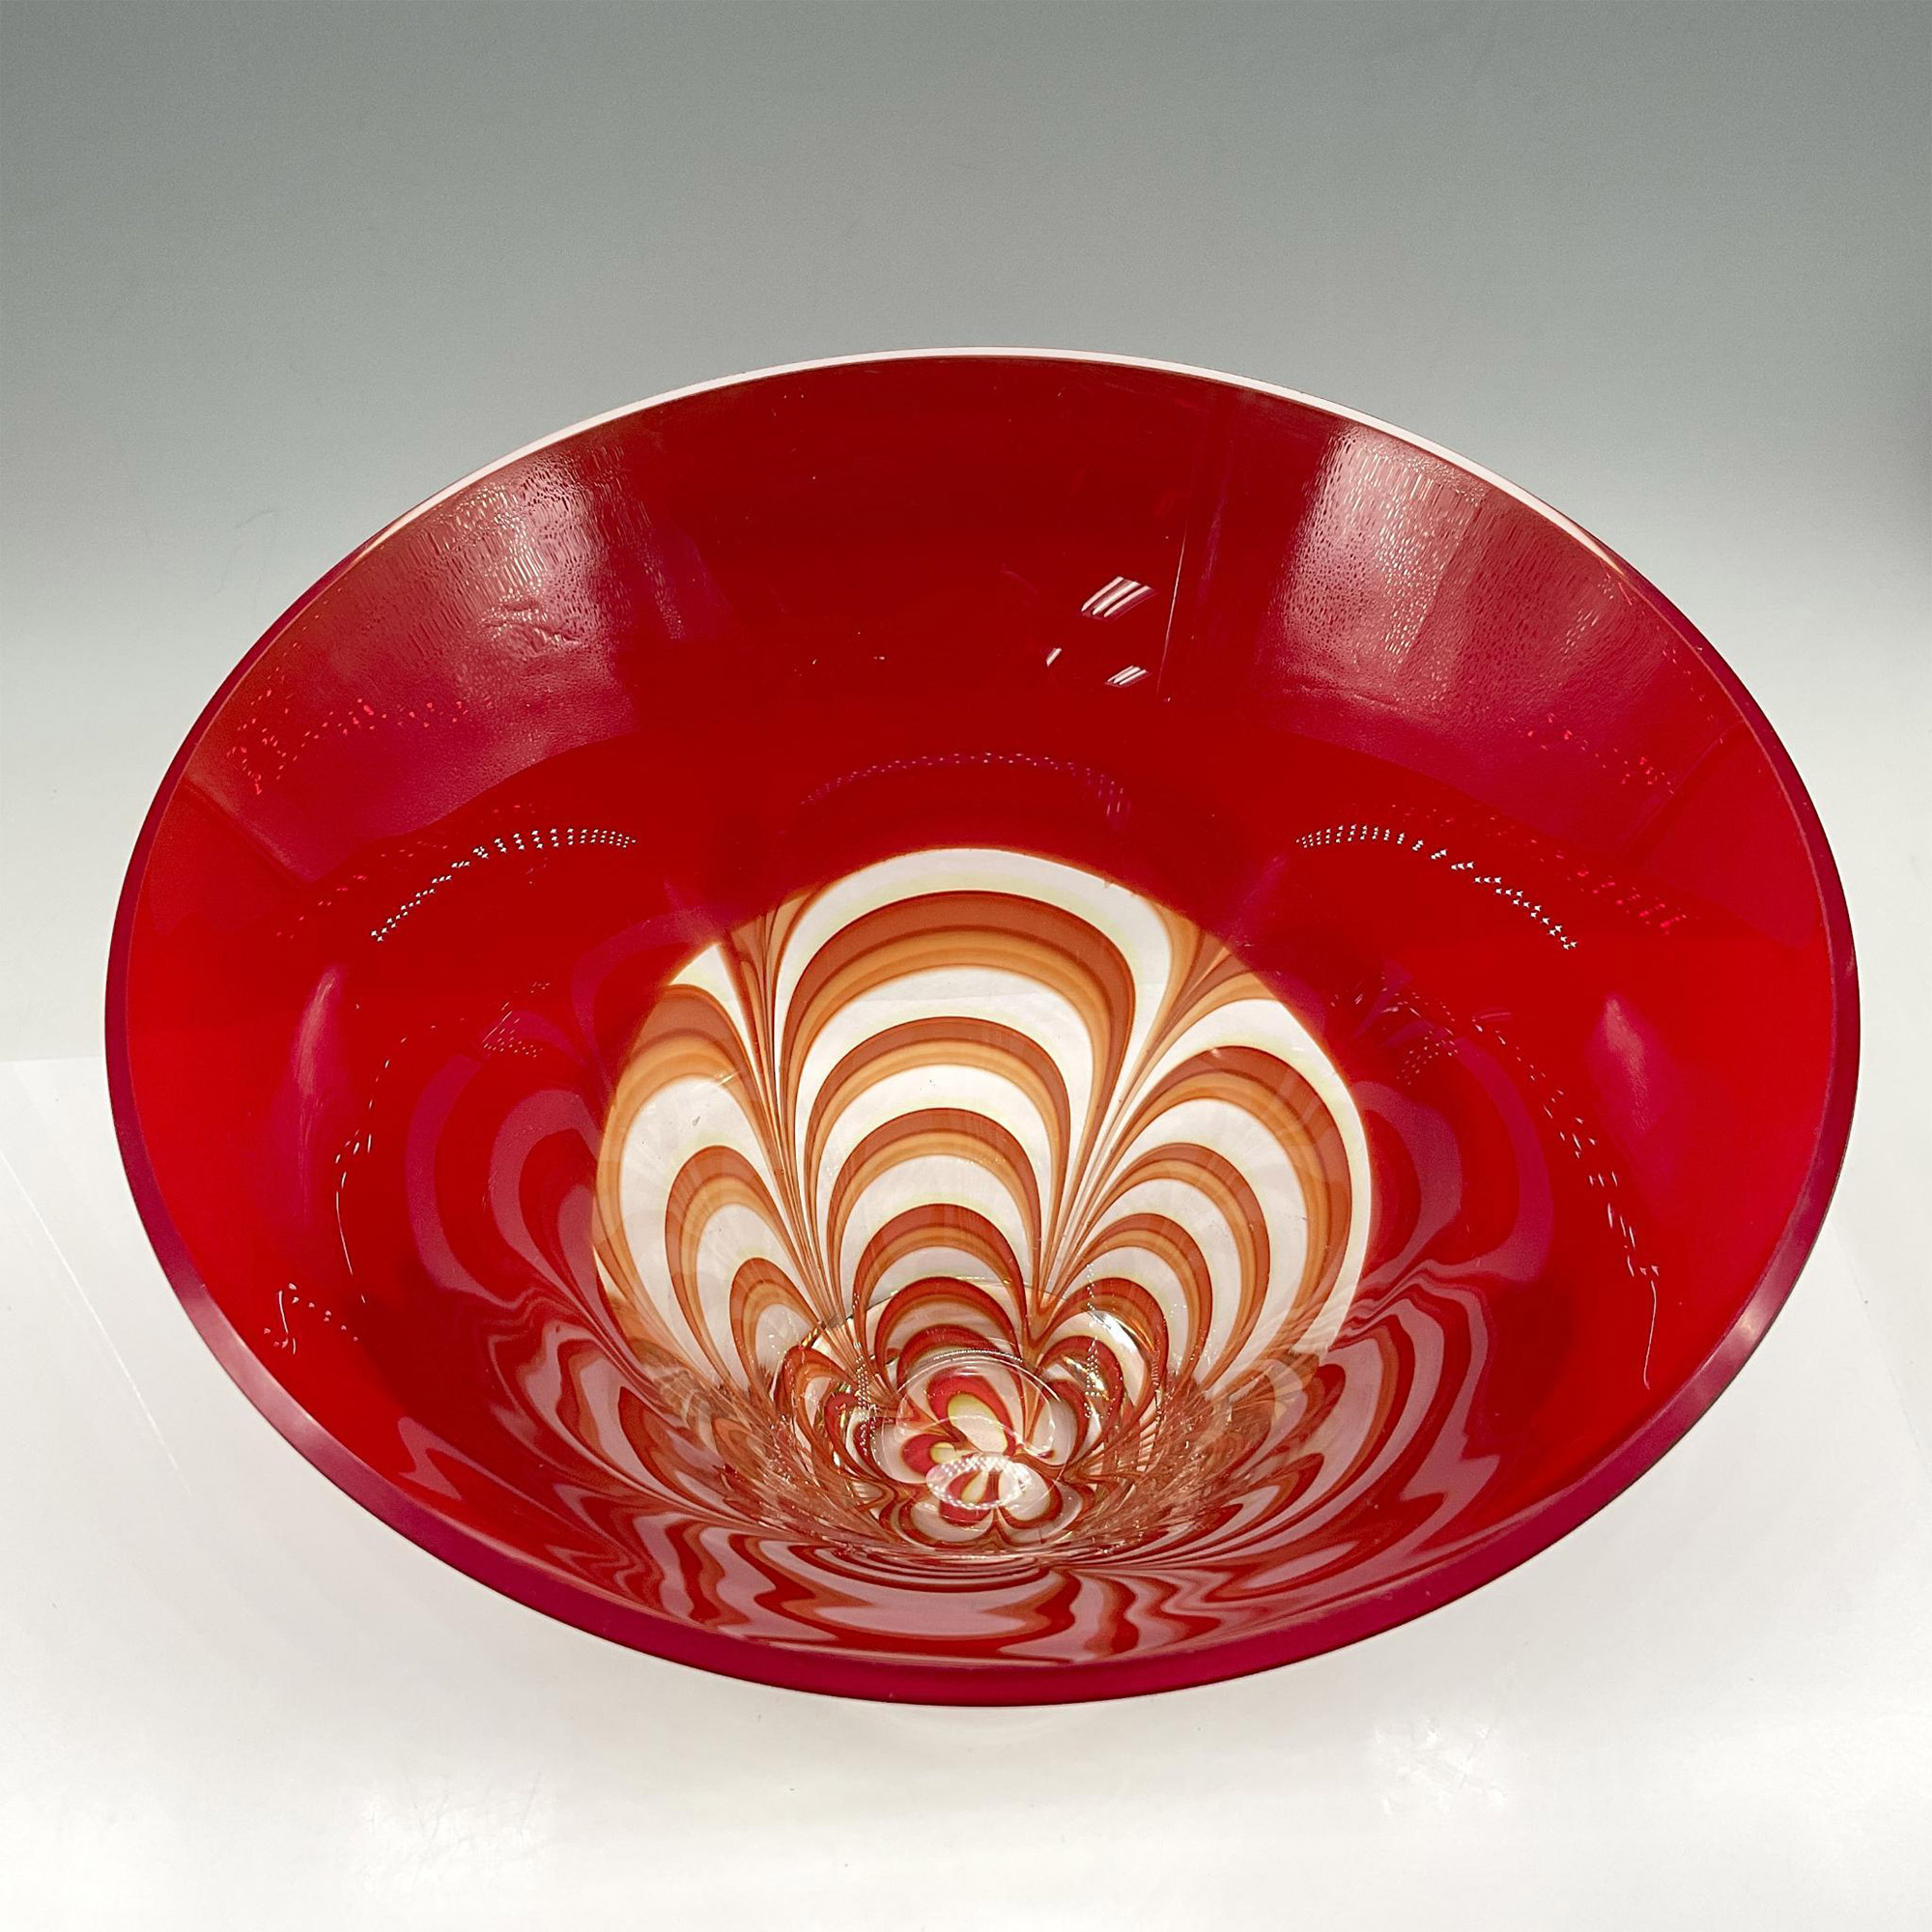 Waterford Crystal Bowl, Evolution Red and Amber - Image 2 of 3